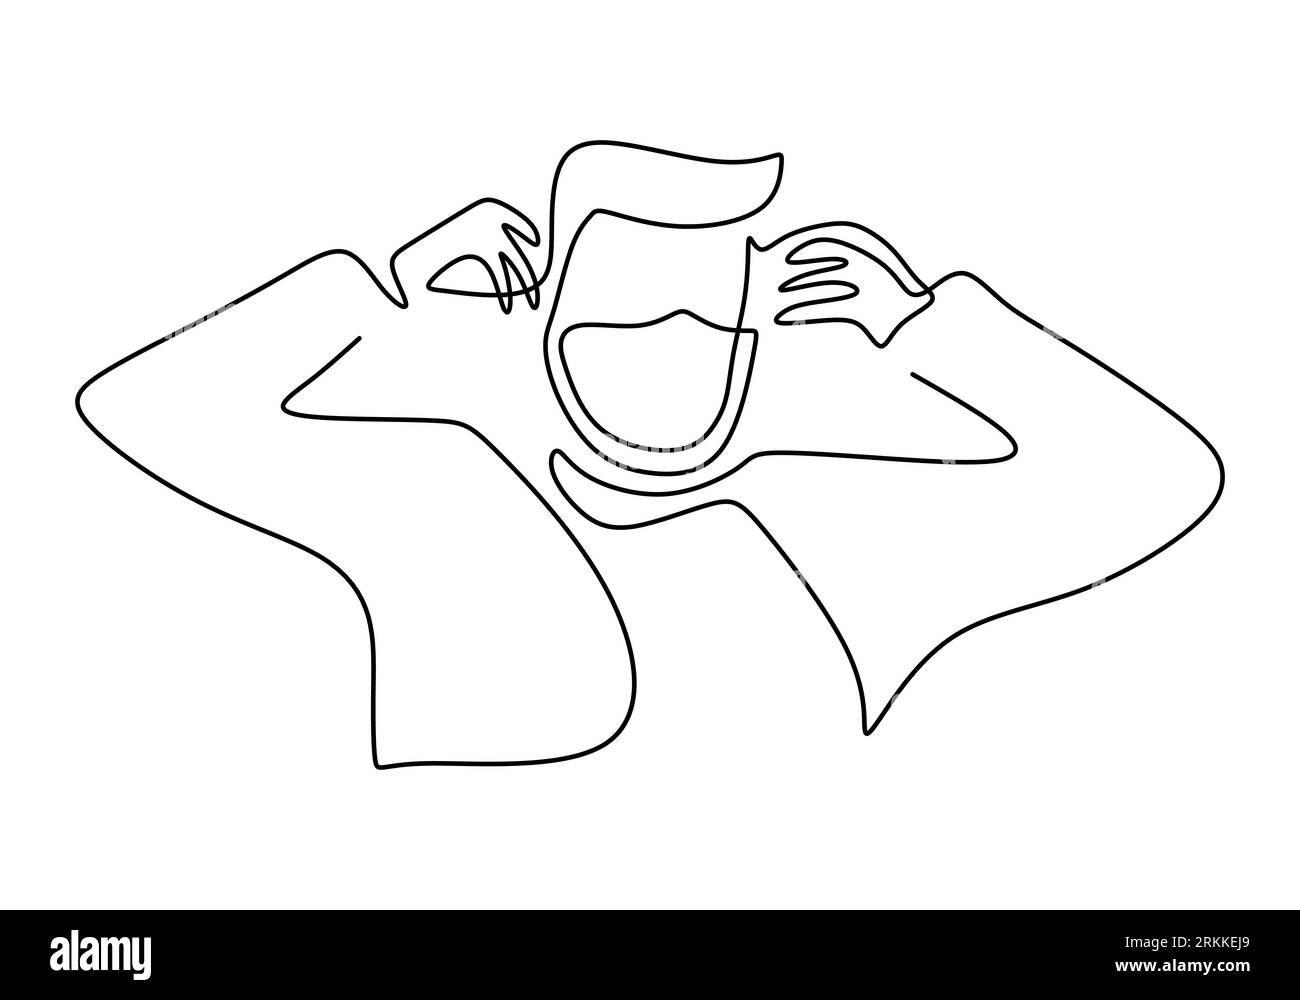 Continuous line drawing of young man wearing surgical mask to protect disease, flu, air pollution, pandemic, virus. Preventing COVID-19 theme. Vector Stock Vector